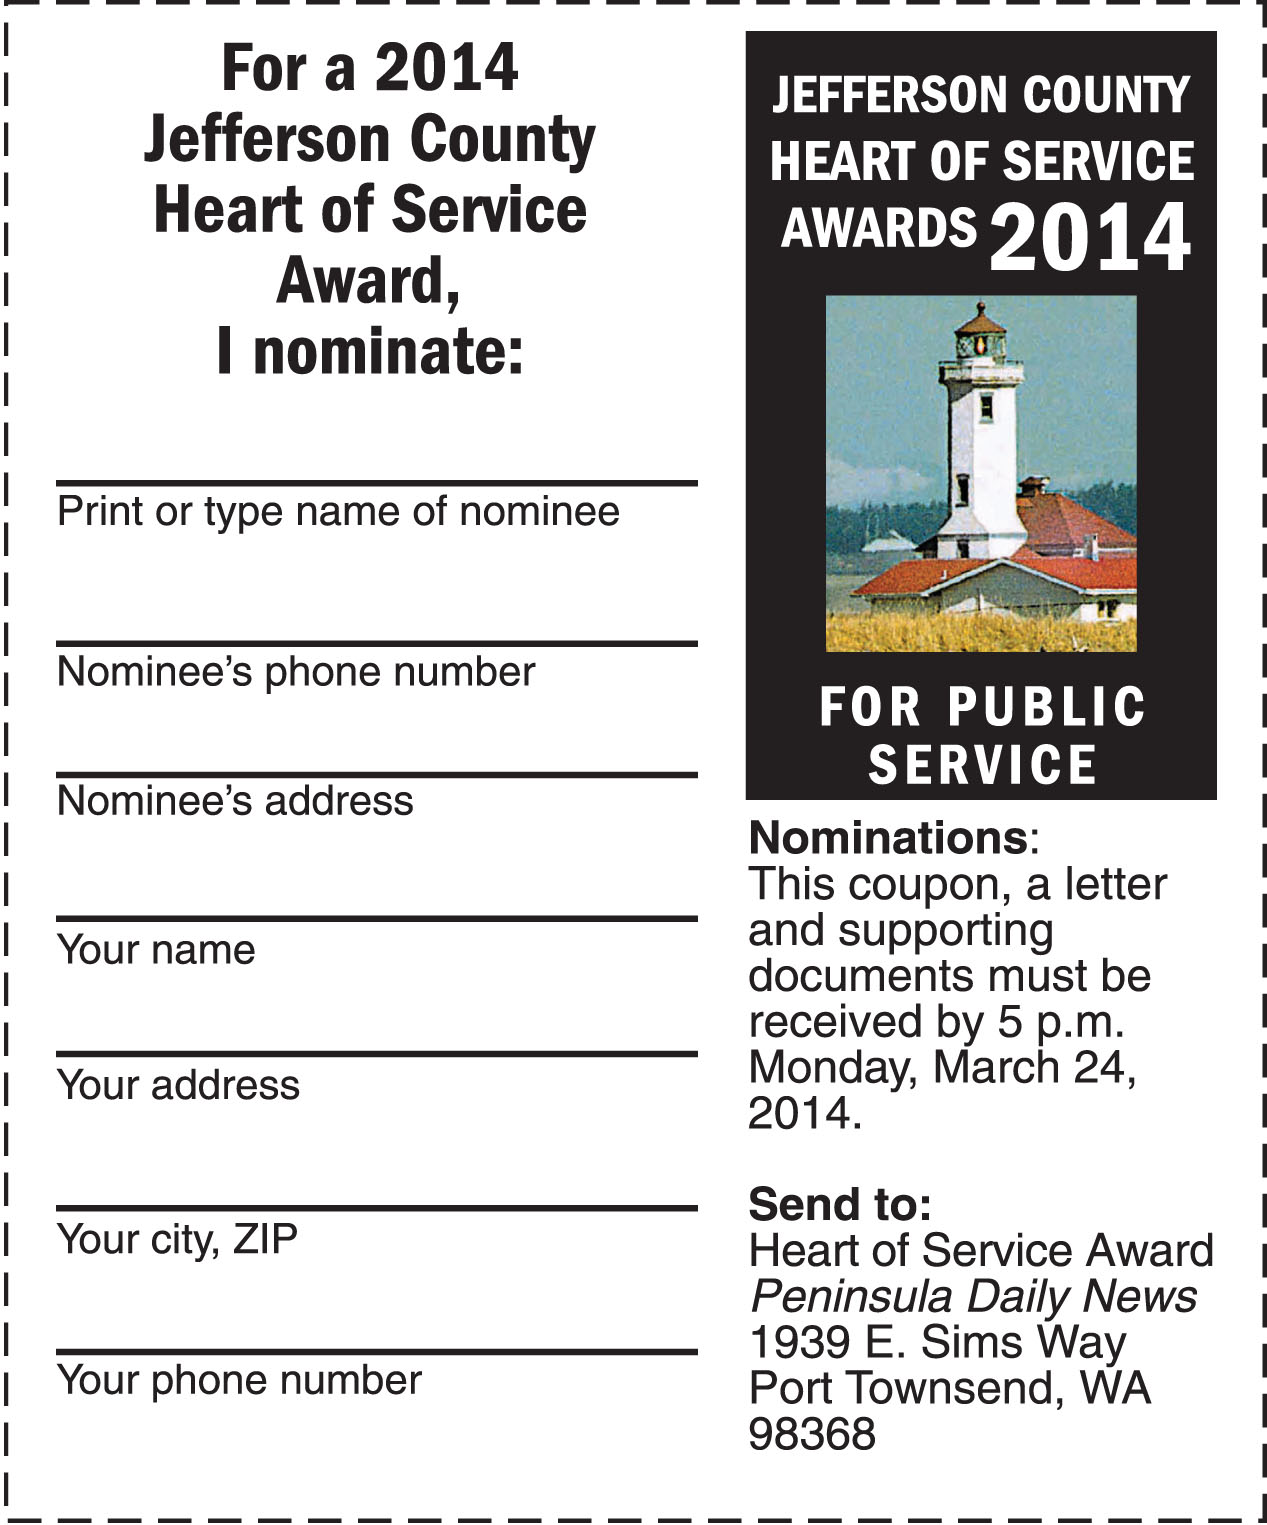 Wanted: A few good Jefferson County heroes for Heart of Service award; nomination deadline is March 24